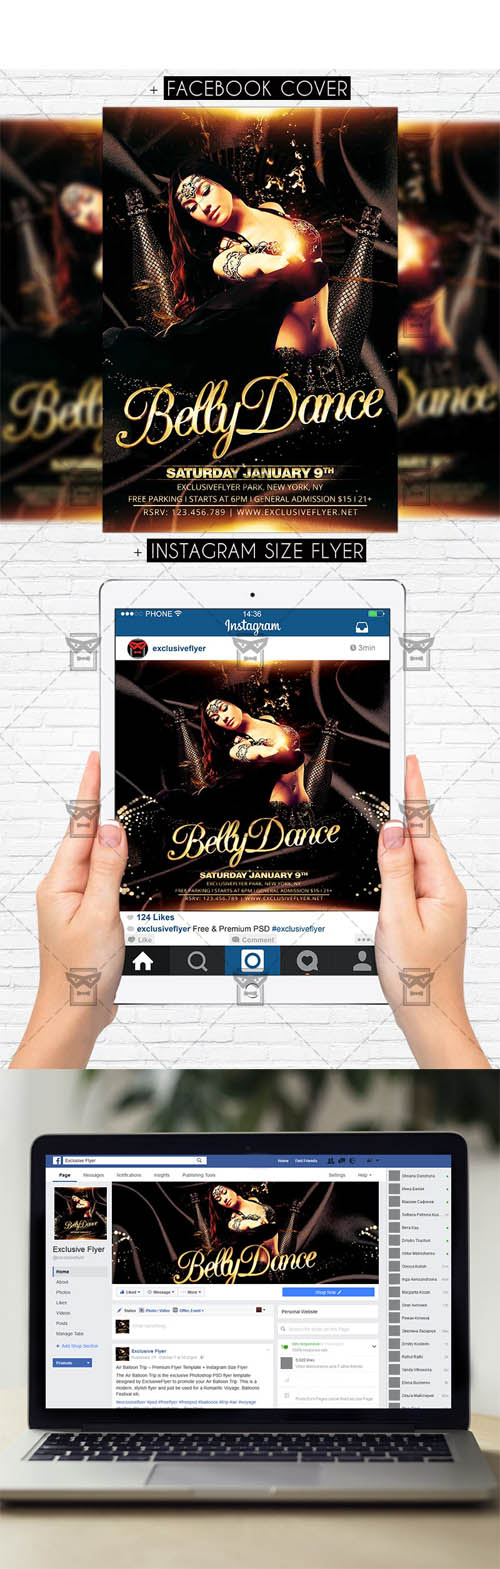 Flyer Template - Belly Dance Party